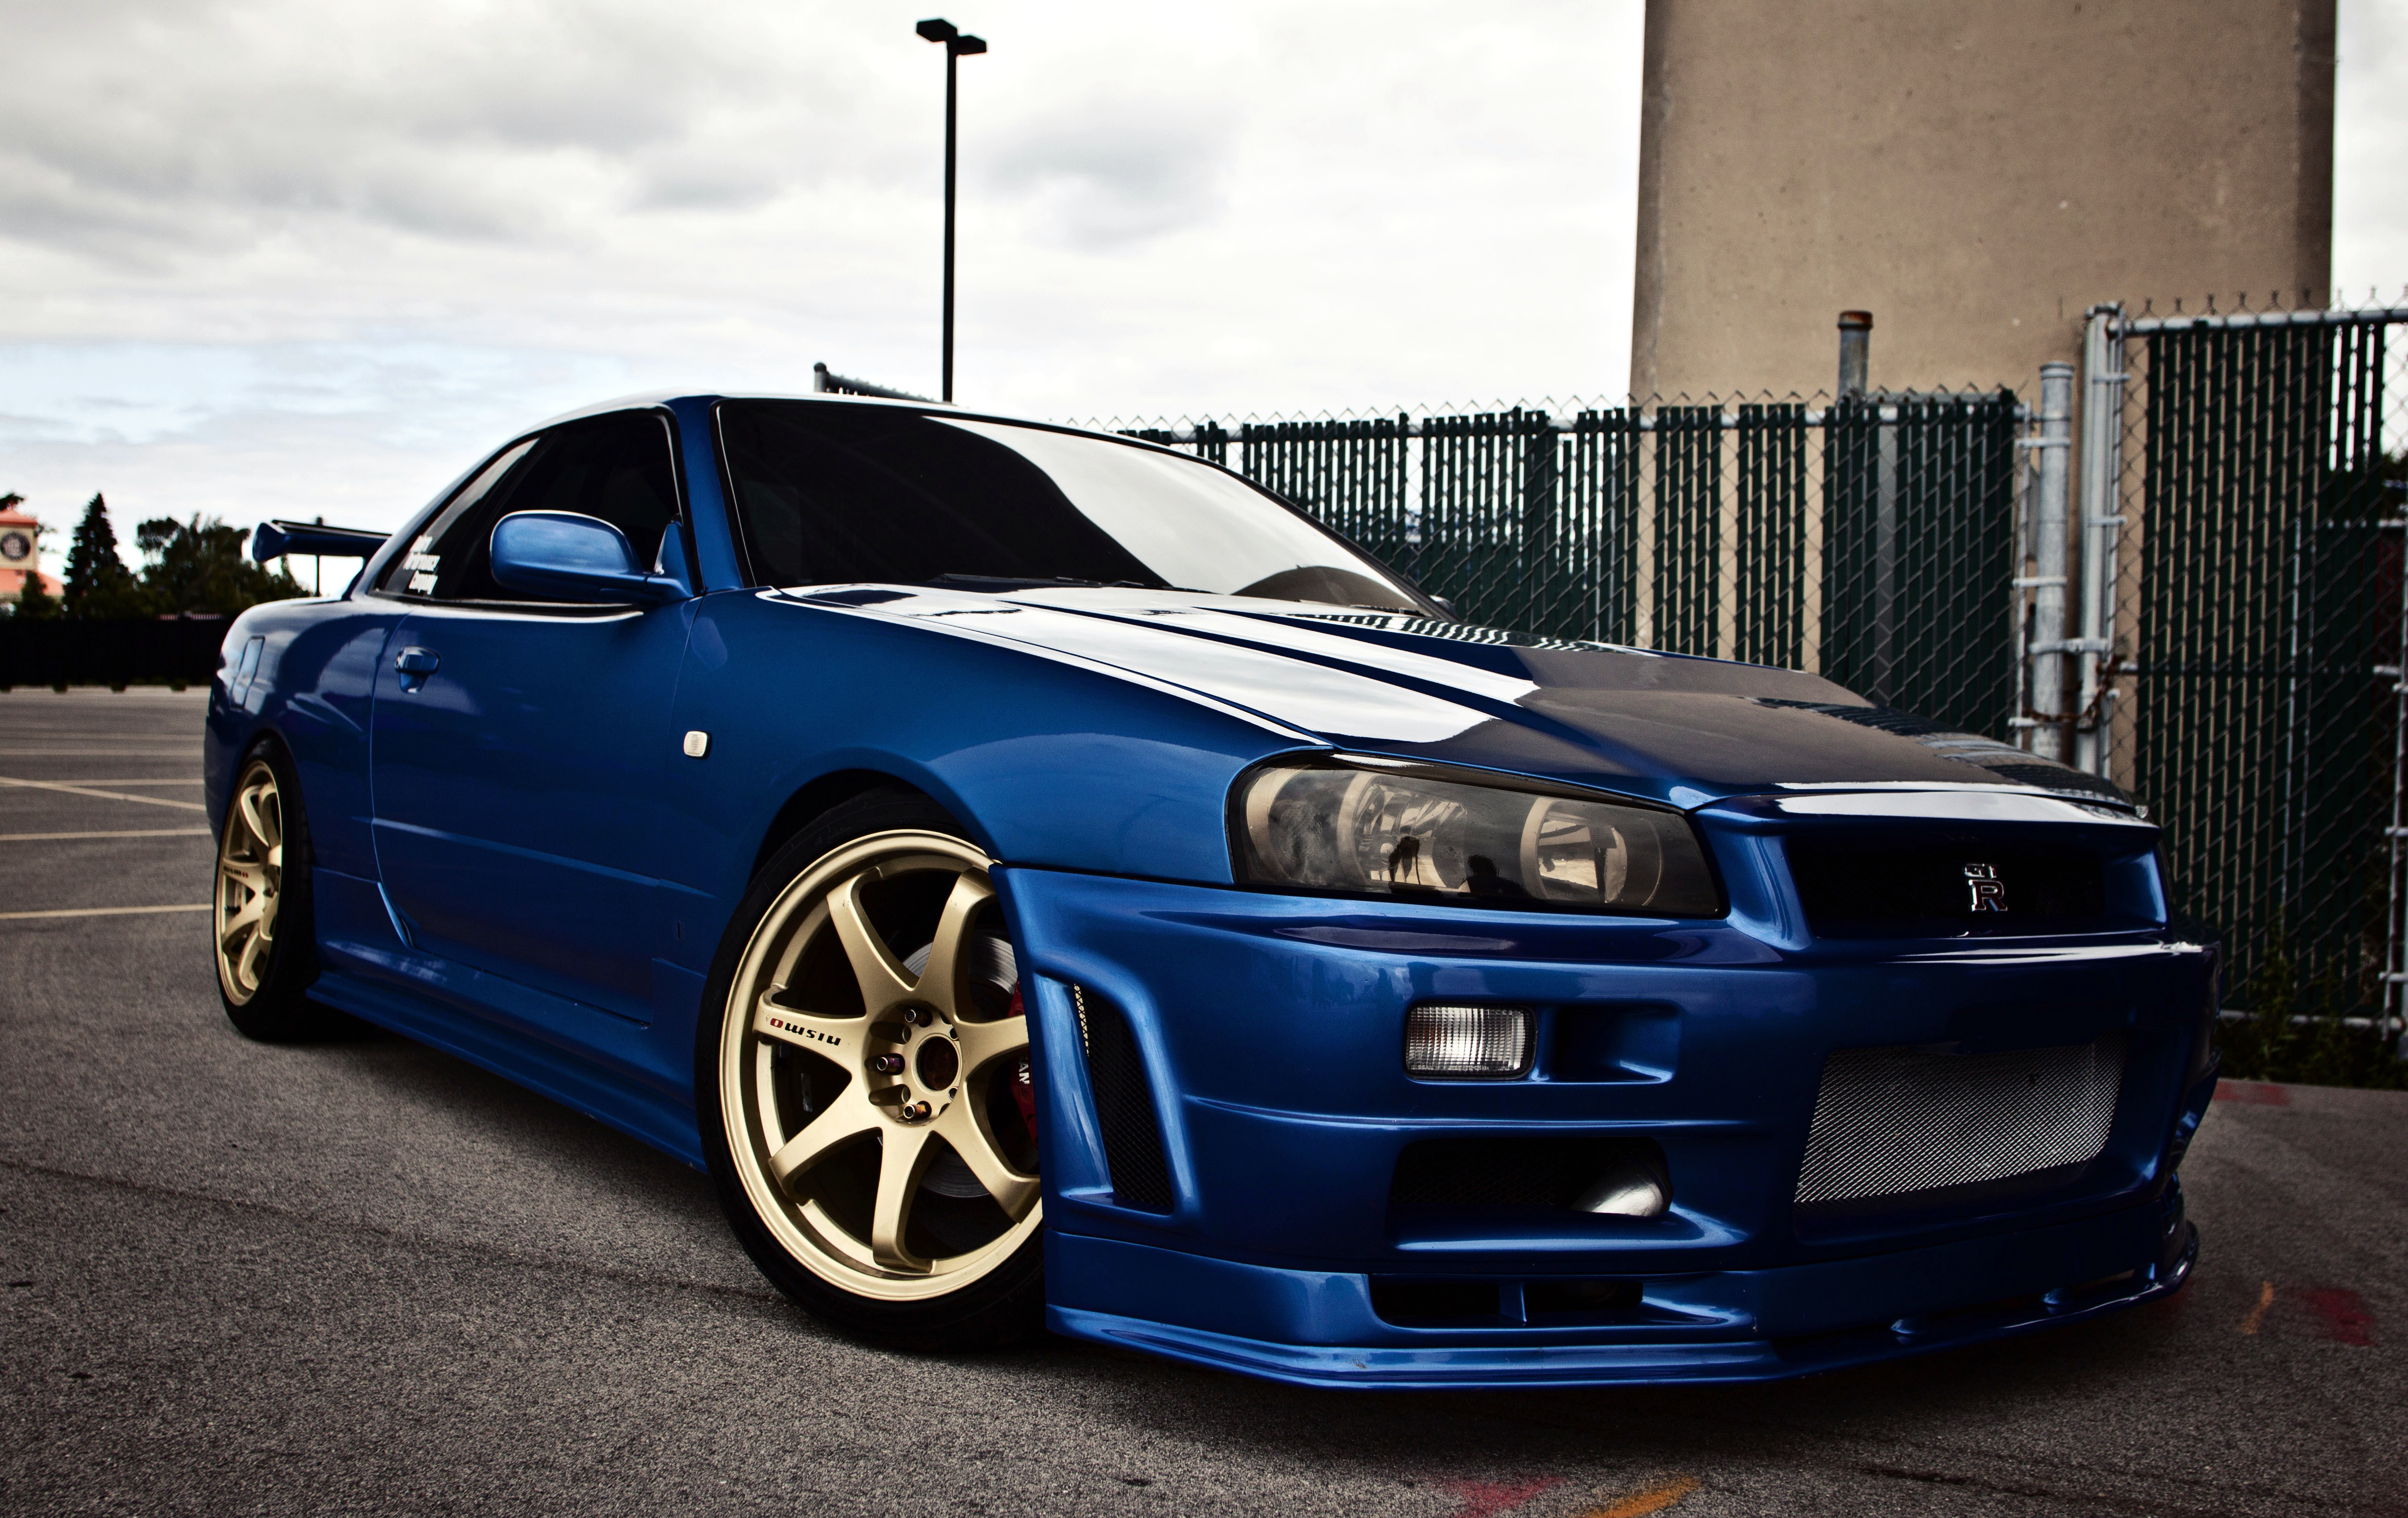 Wallpaper Nissan Skyline Gtr R34 Blue Car Pictures And Photos